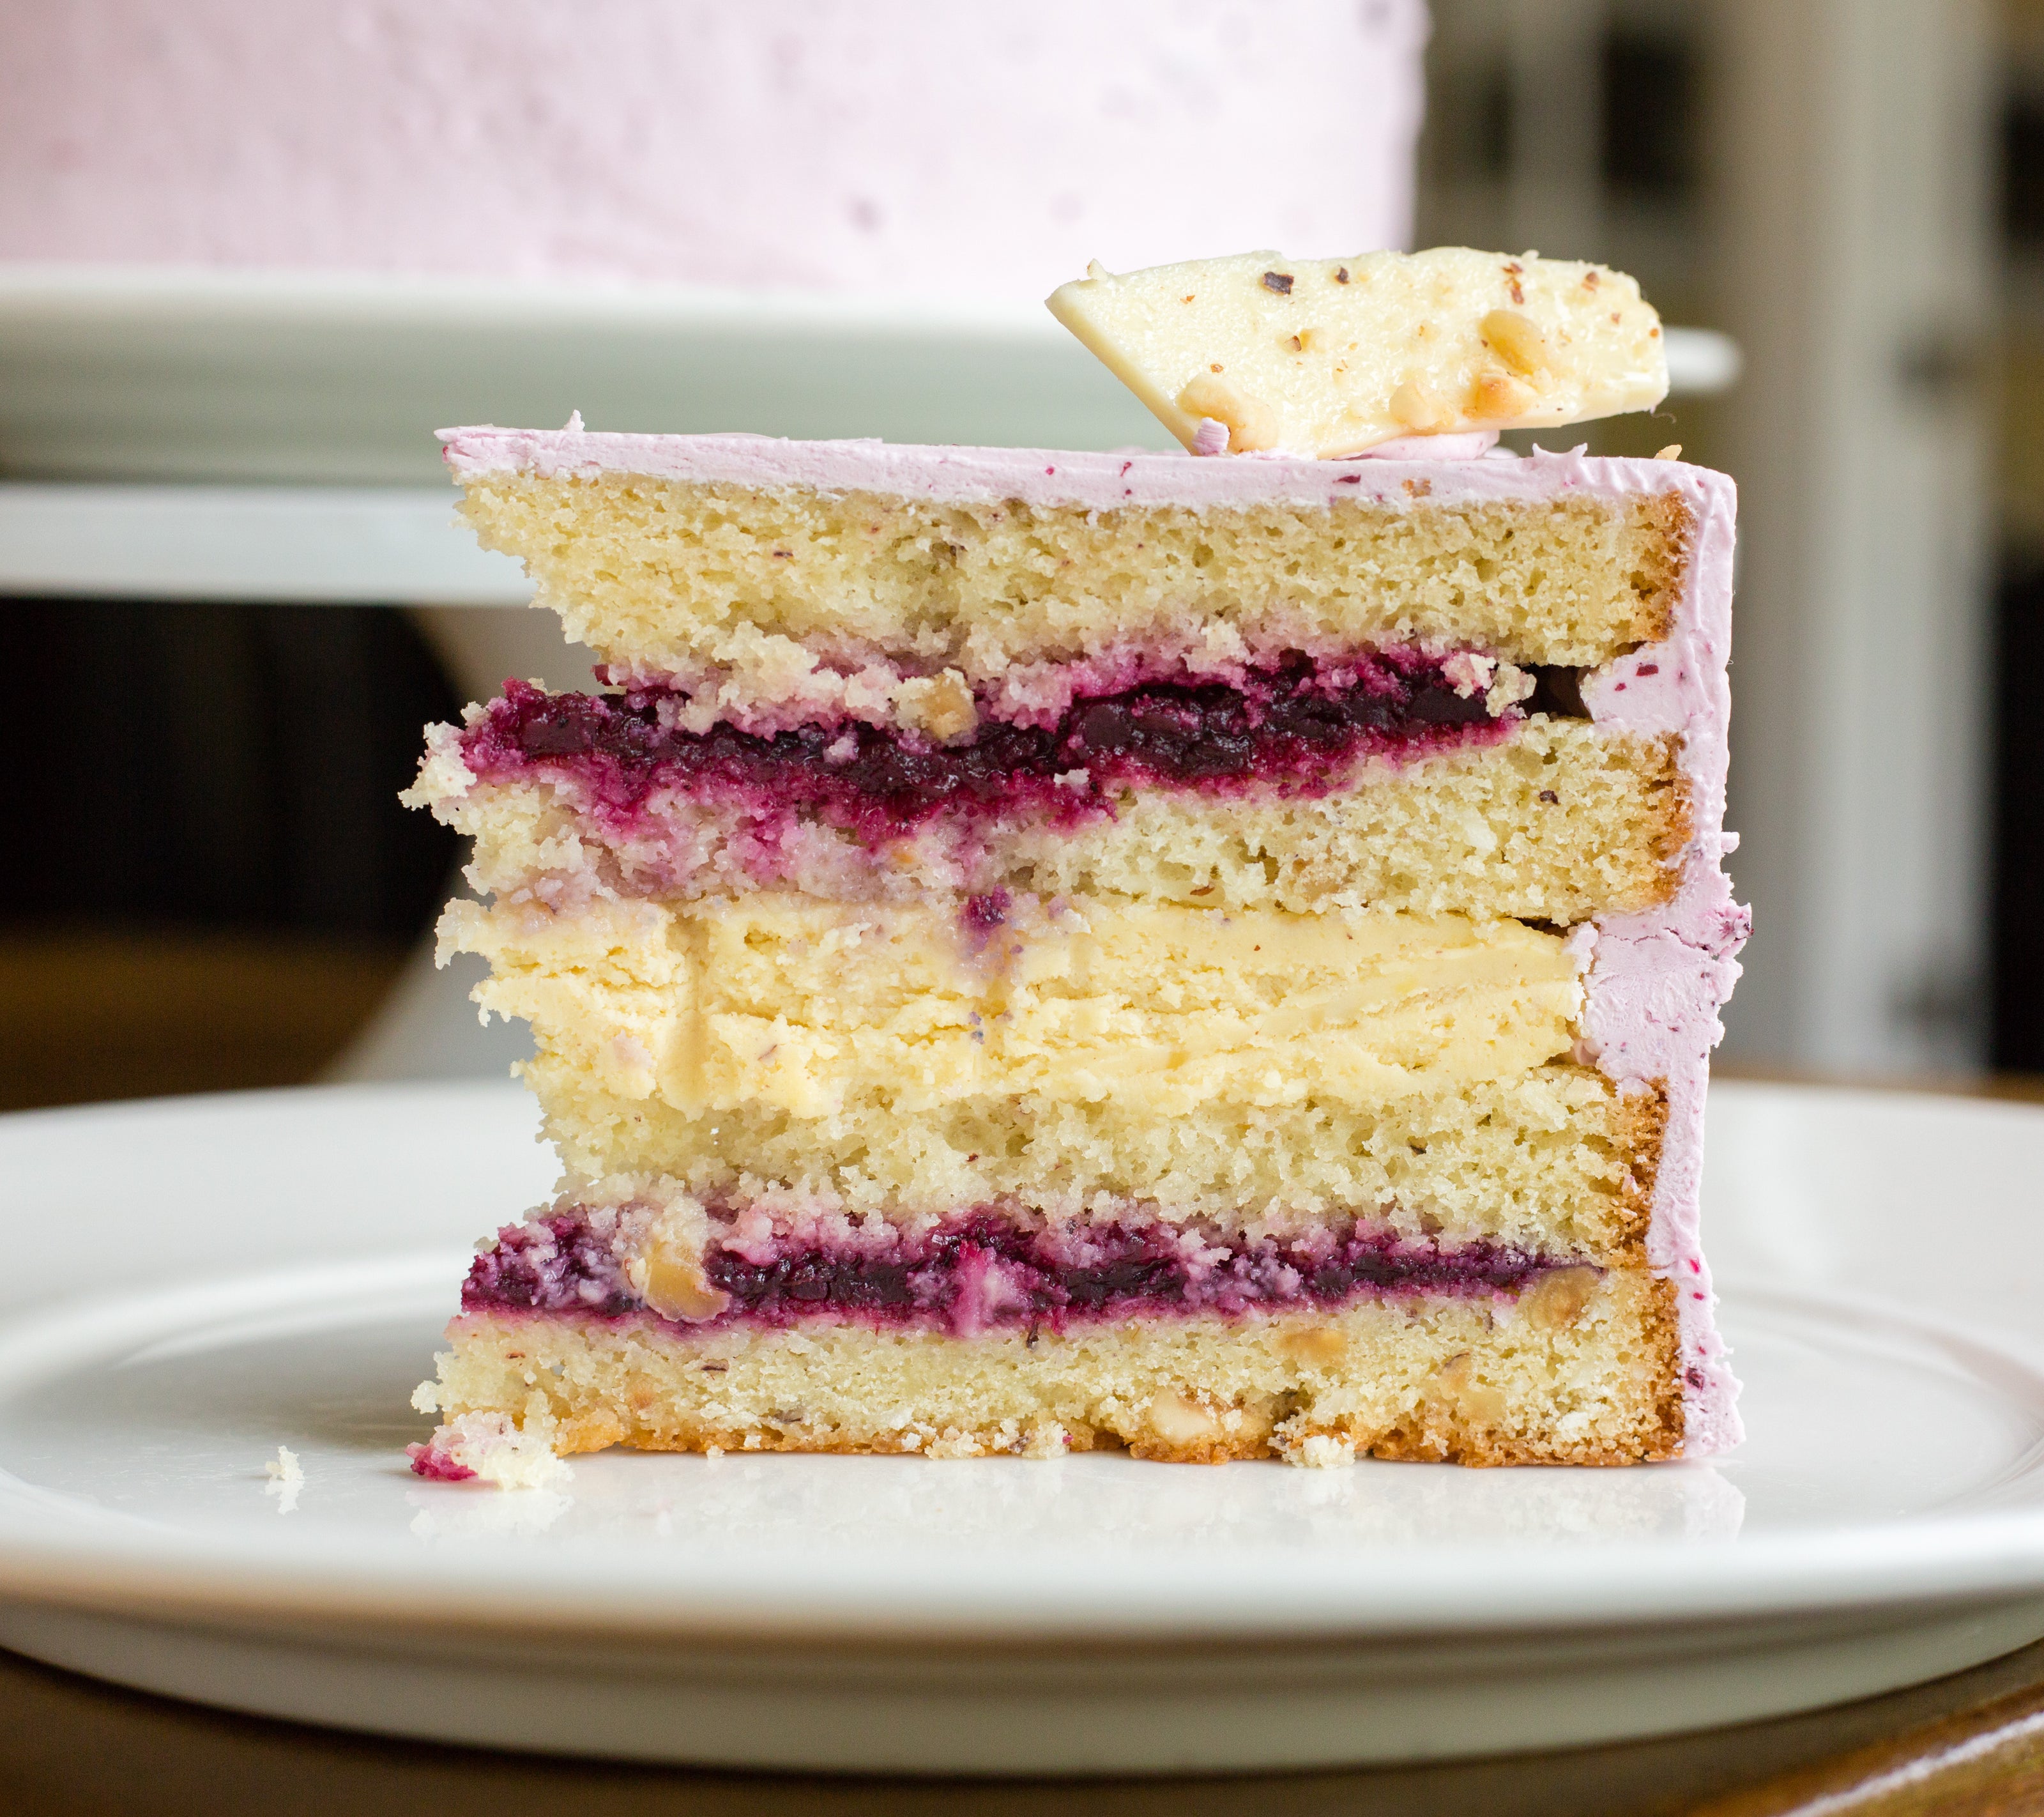 A slice of the Mt. Adams cake from Papa Haydn, with layers of hazelnut-coconut cake, praline Viennese buttercream, and wild huckleberry compote, finished with huckleberry buttercream